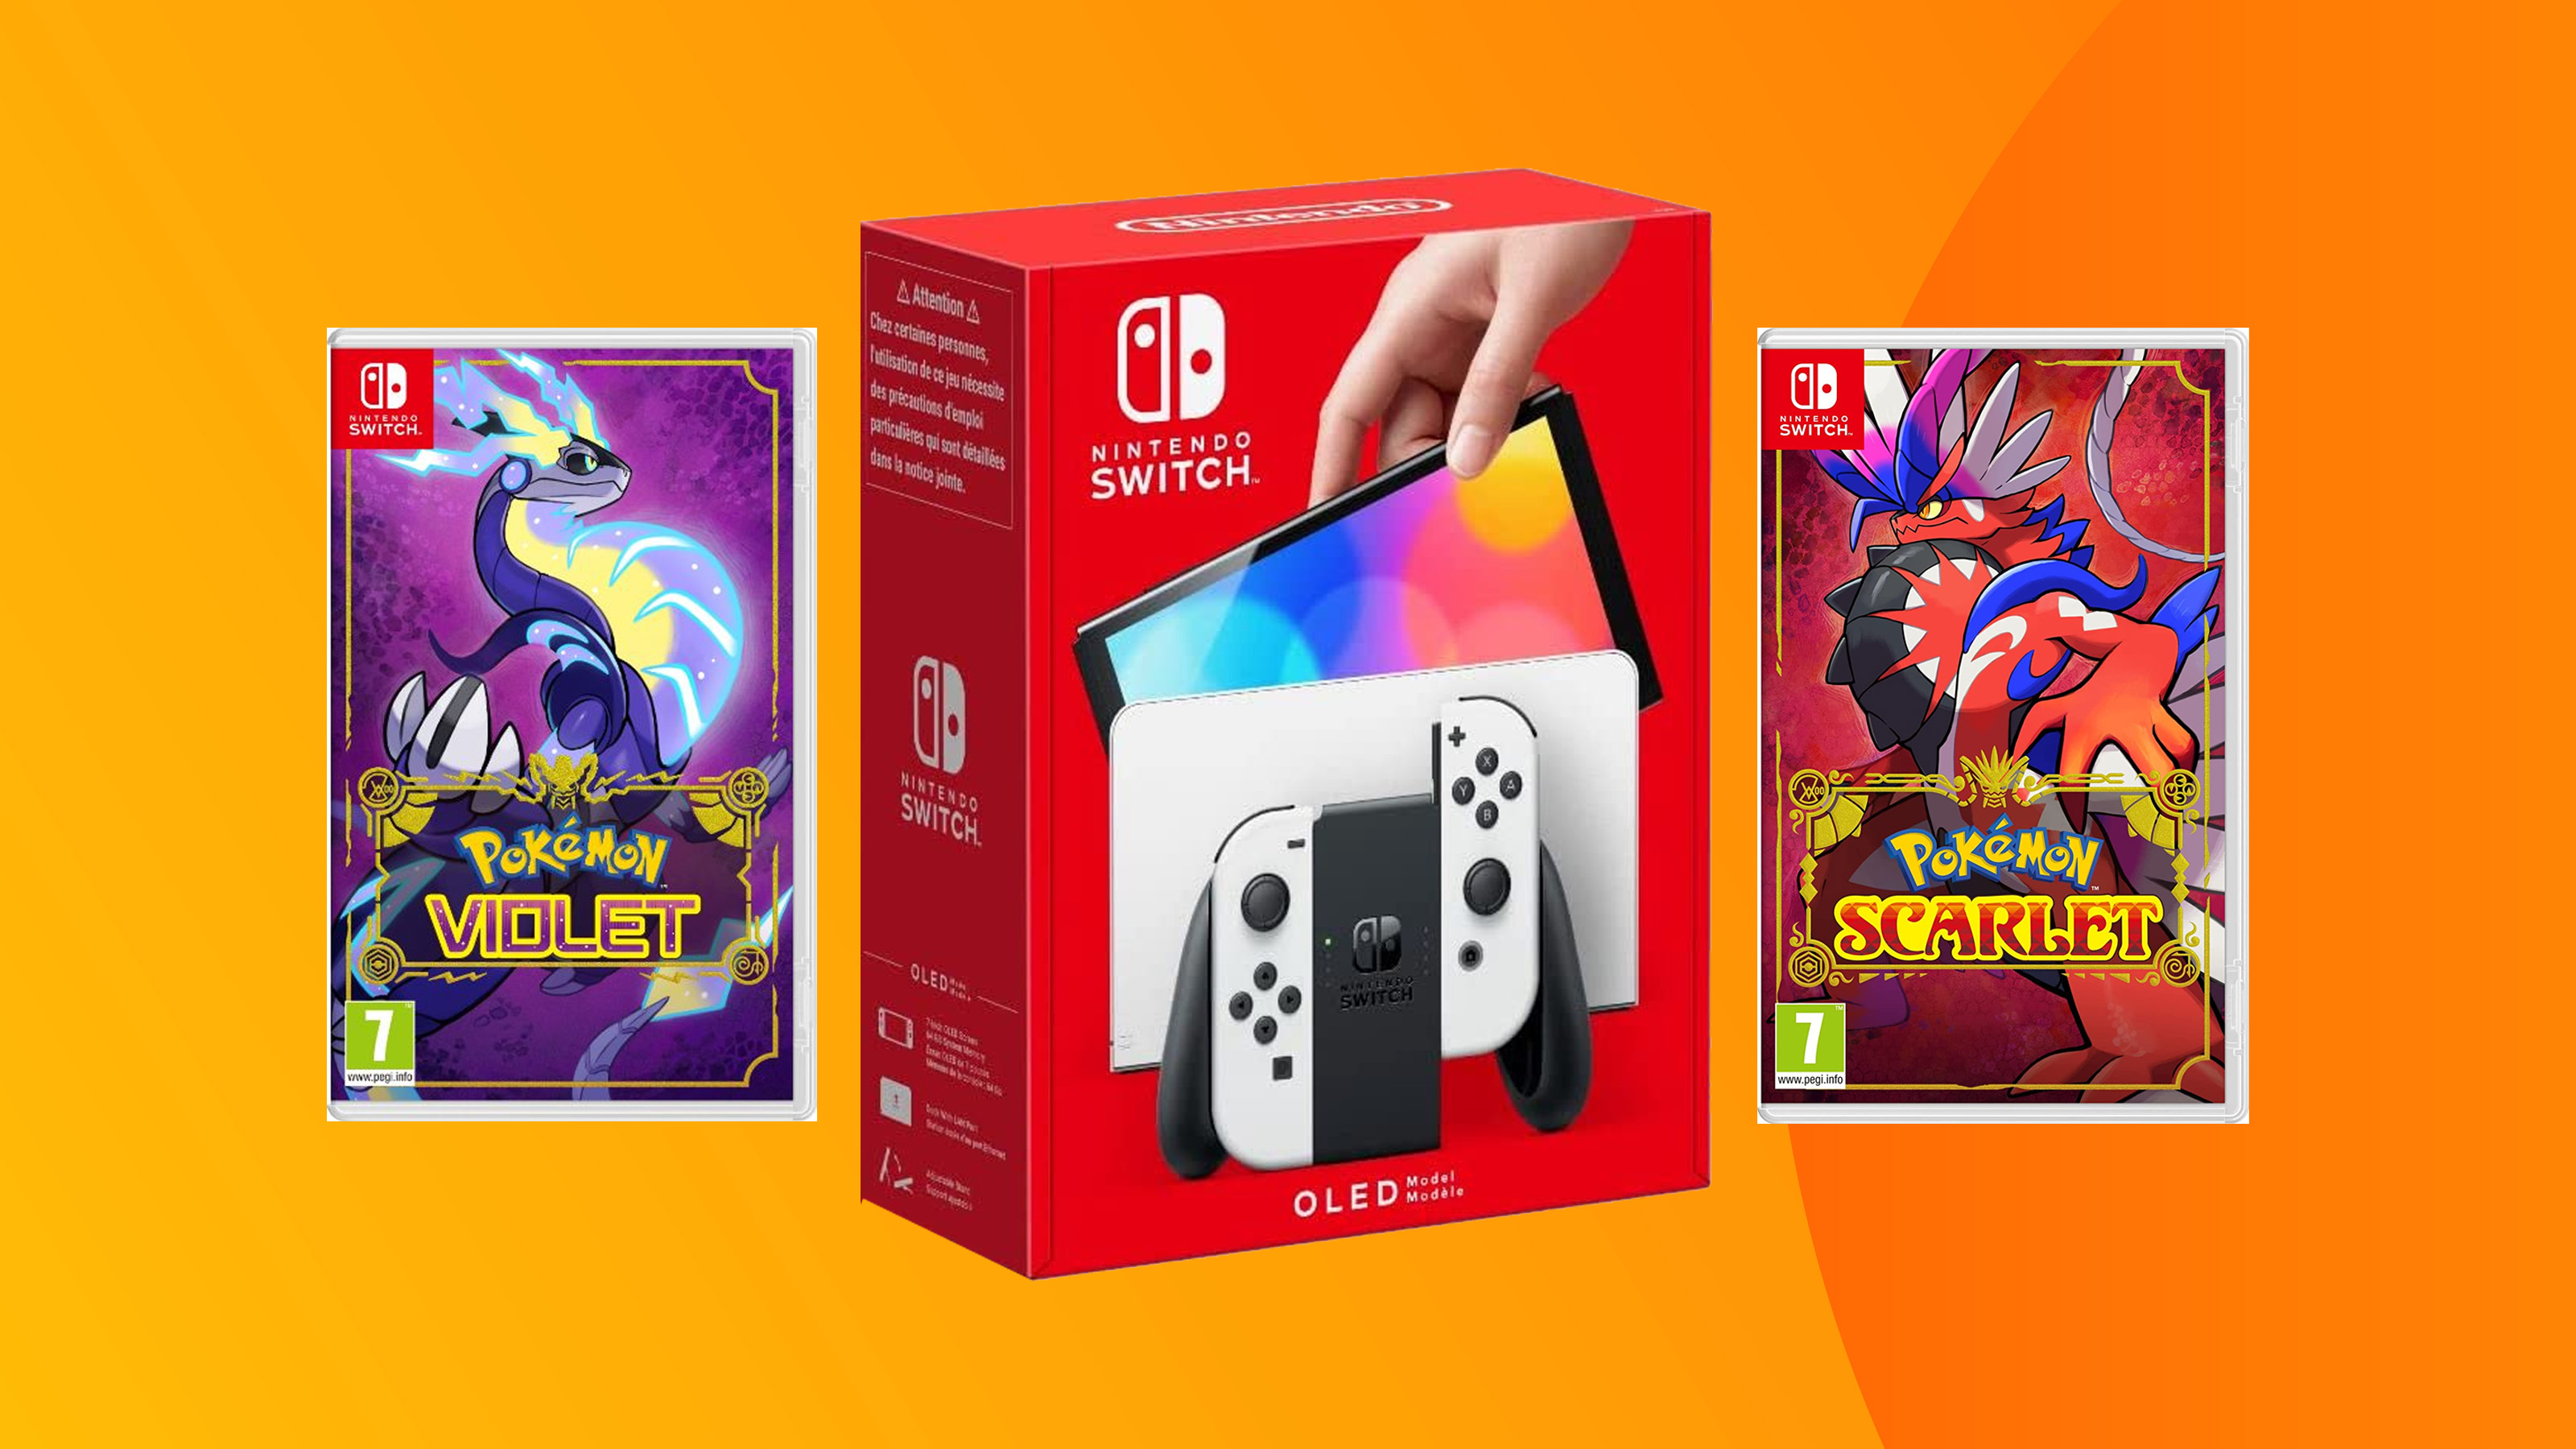 A product shot of the Switch OLED console and Pokemon games on a colorful baggkround